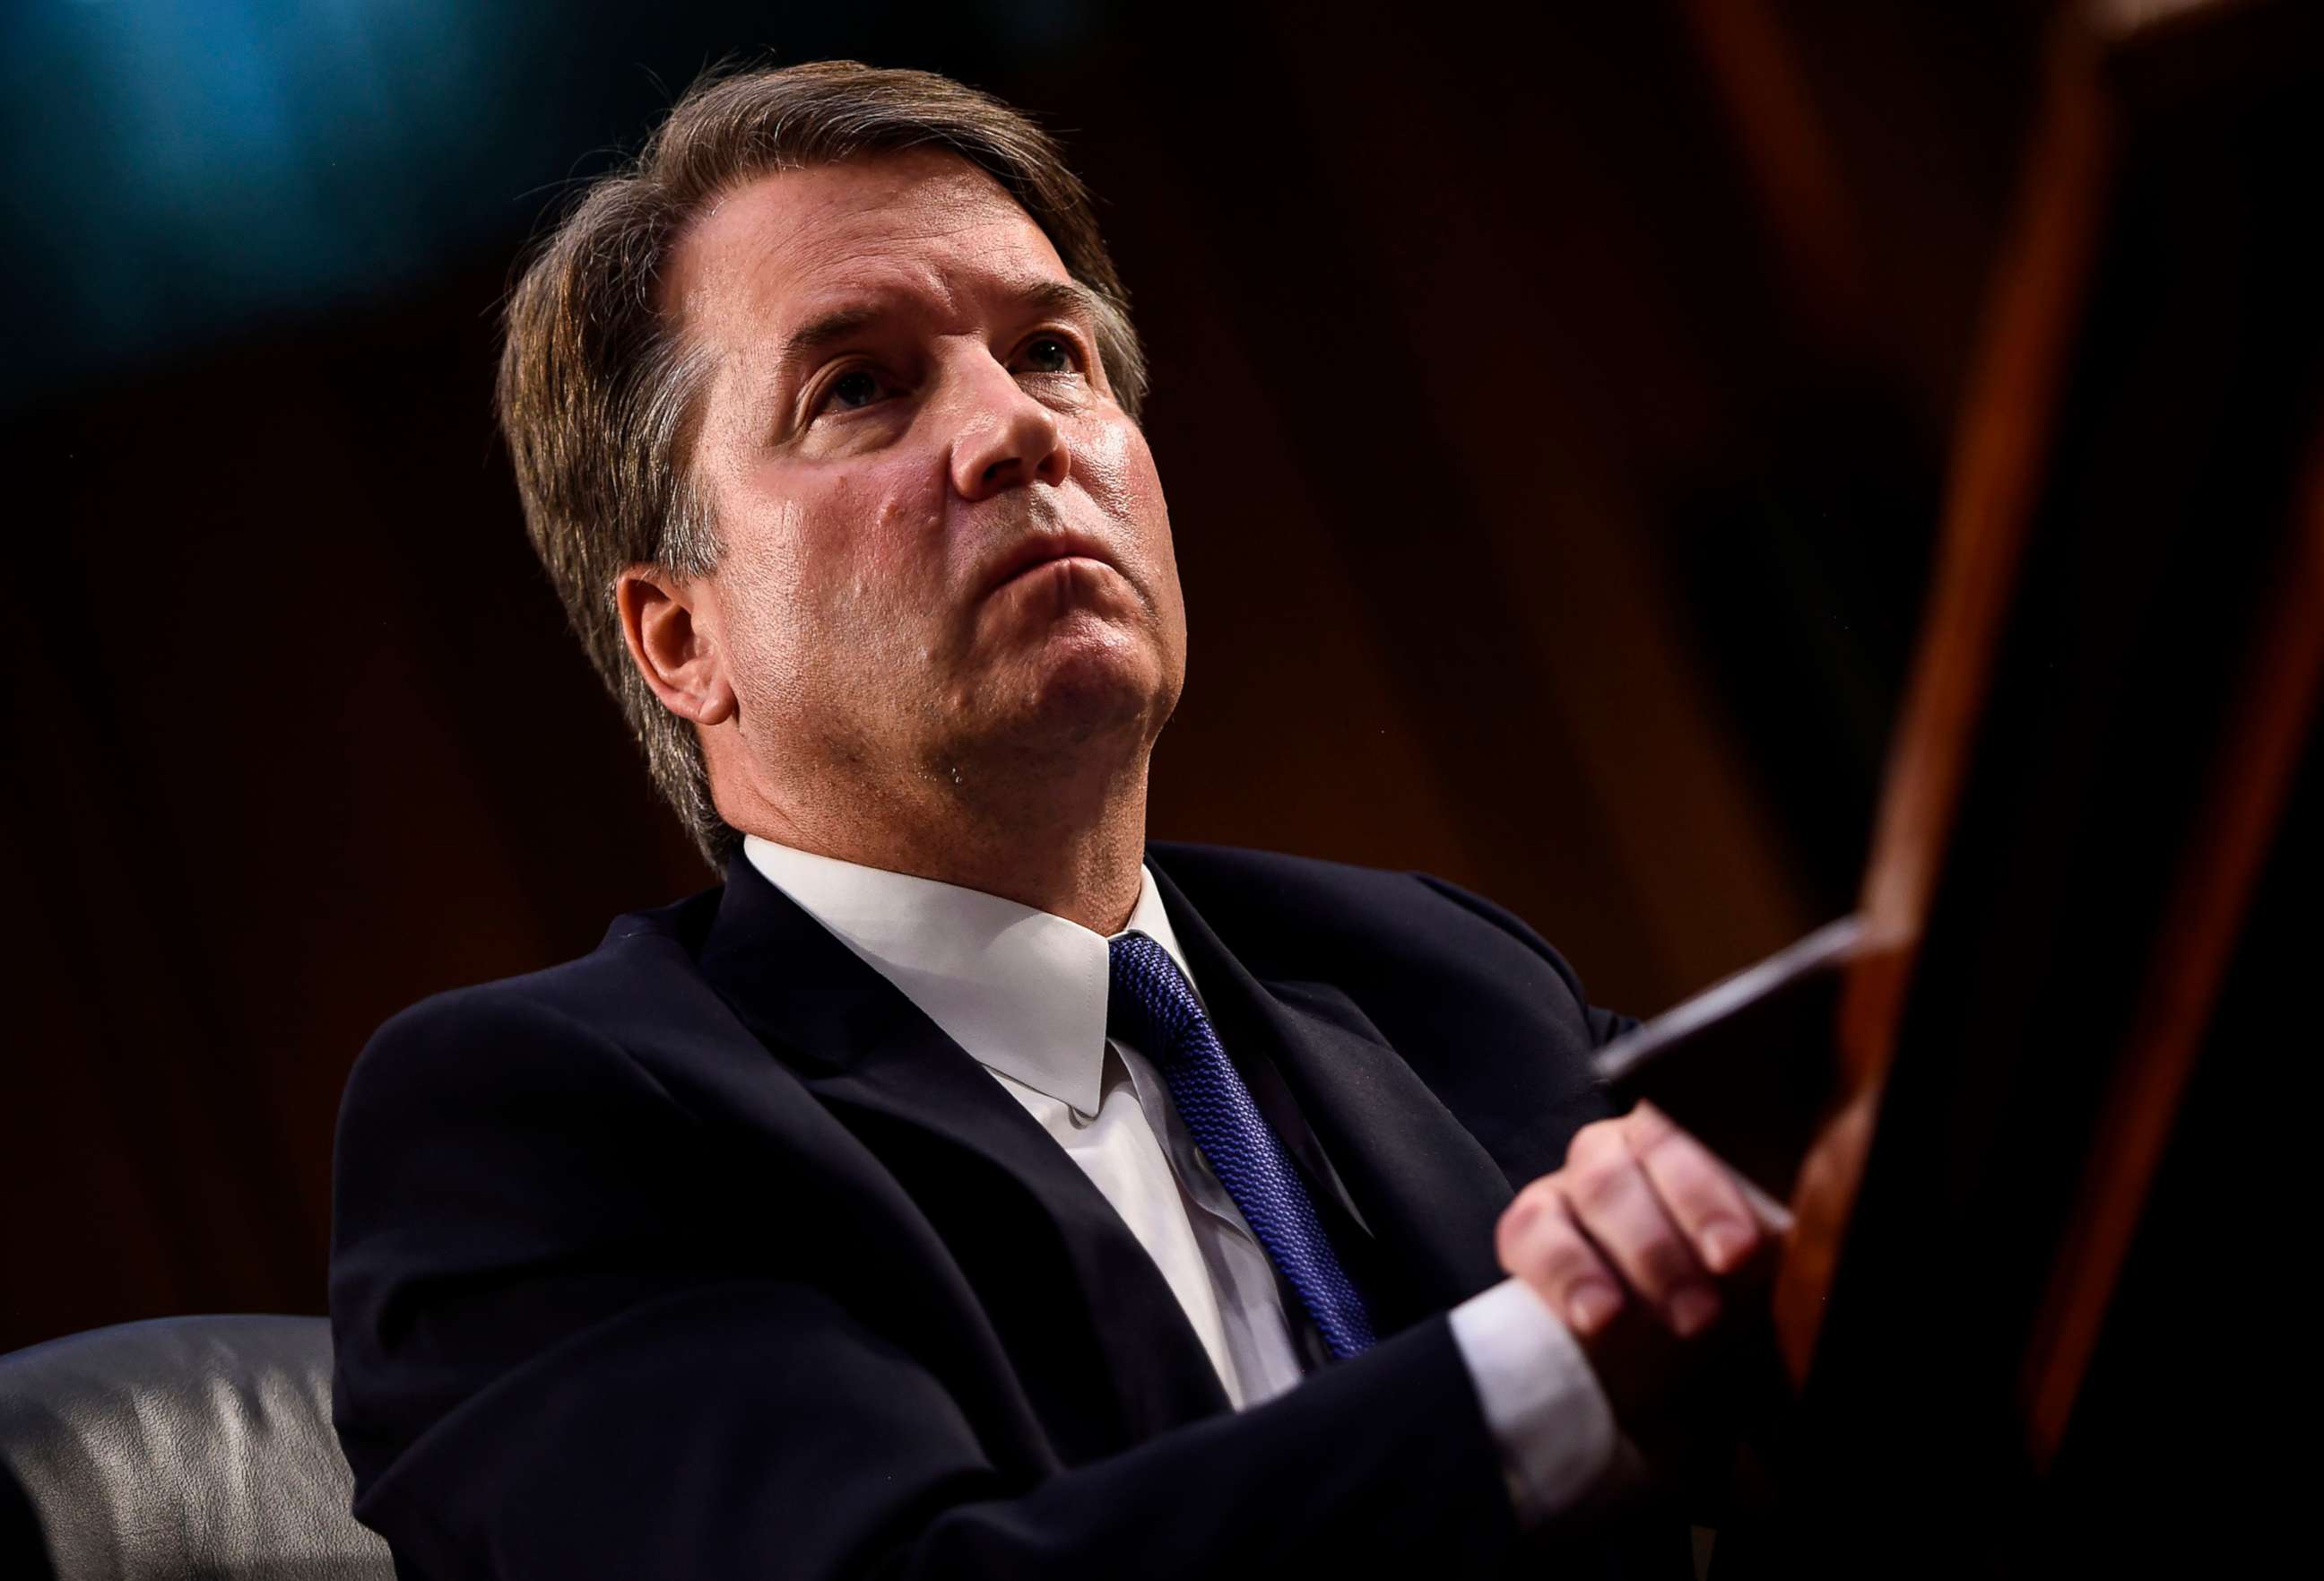 PHOTO: Judge Brett Kavanaugh looks on during his confirmation hearing in the Senate Judiciary Committee to be Associate Justice of the Supreme Court, Sept. 4, 2018 in Washington.